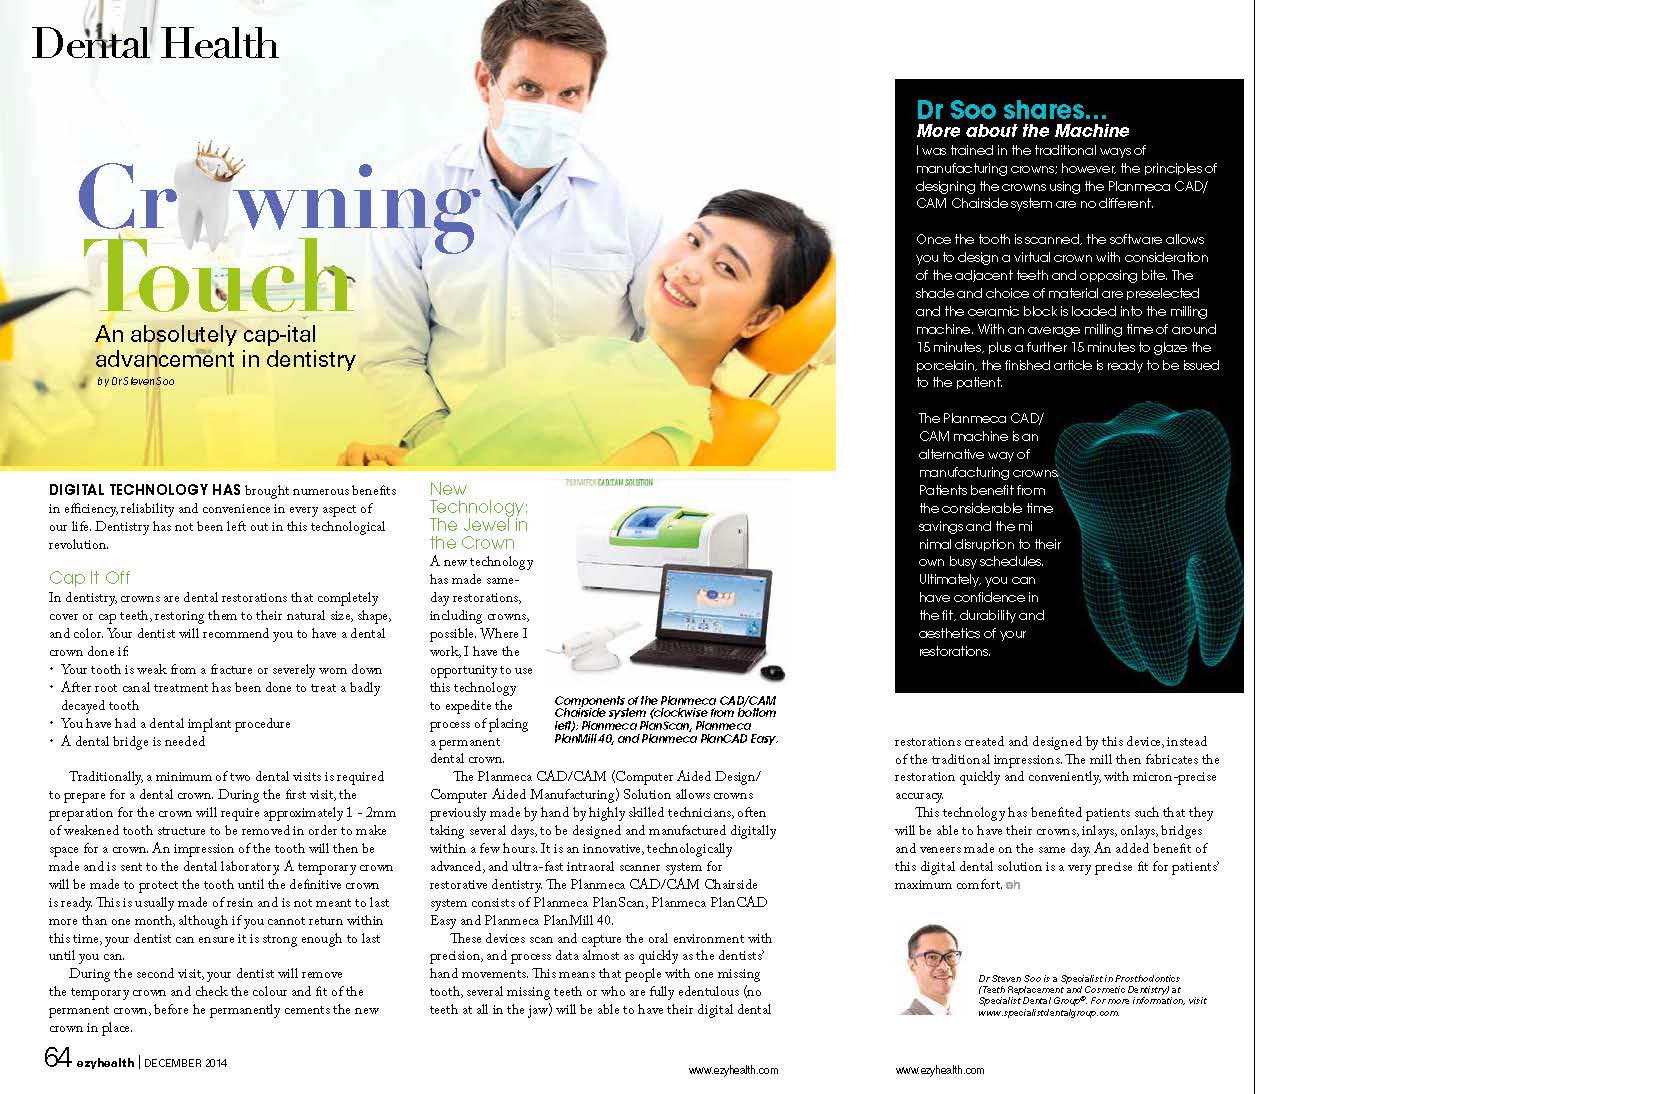 Ezyhealth Magazine, December 2014 issue: “Crowning Touch – An absolutely Cap-ital Advancement in Dentistry.”